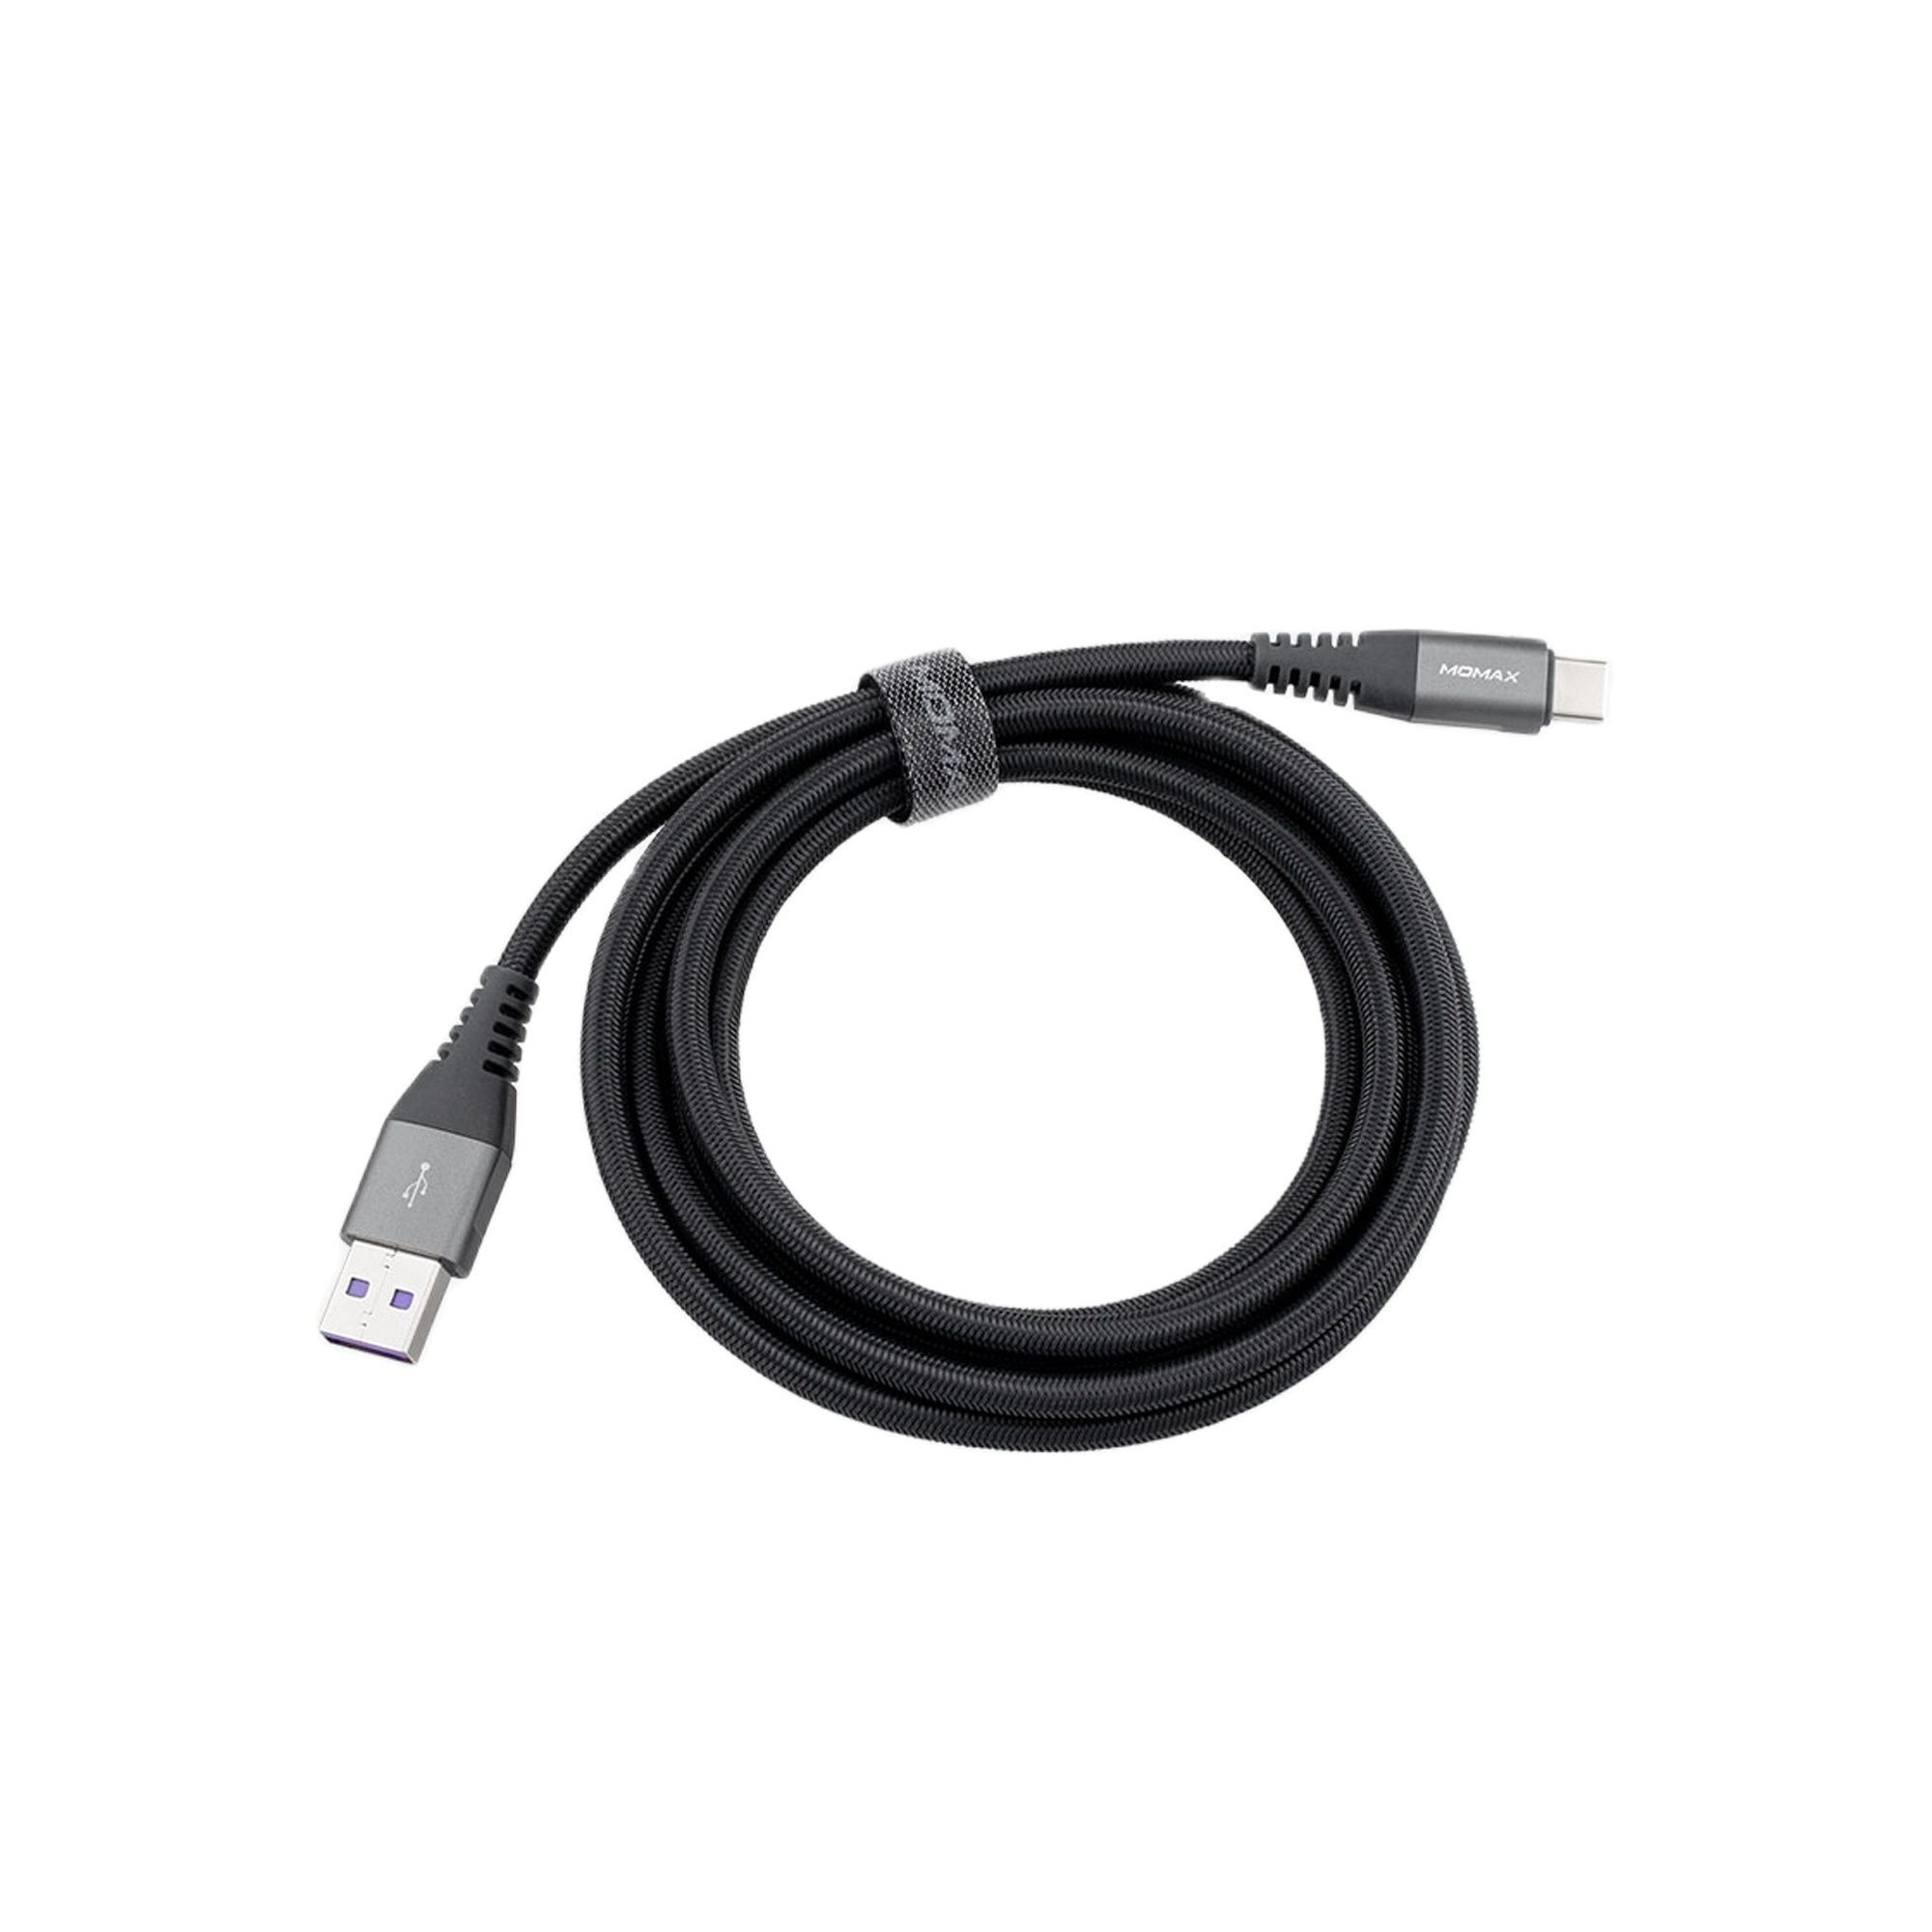 Elite Link USB-A to USB-C Cable 2M - Space Gray